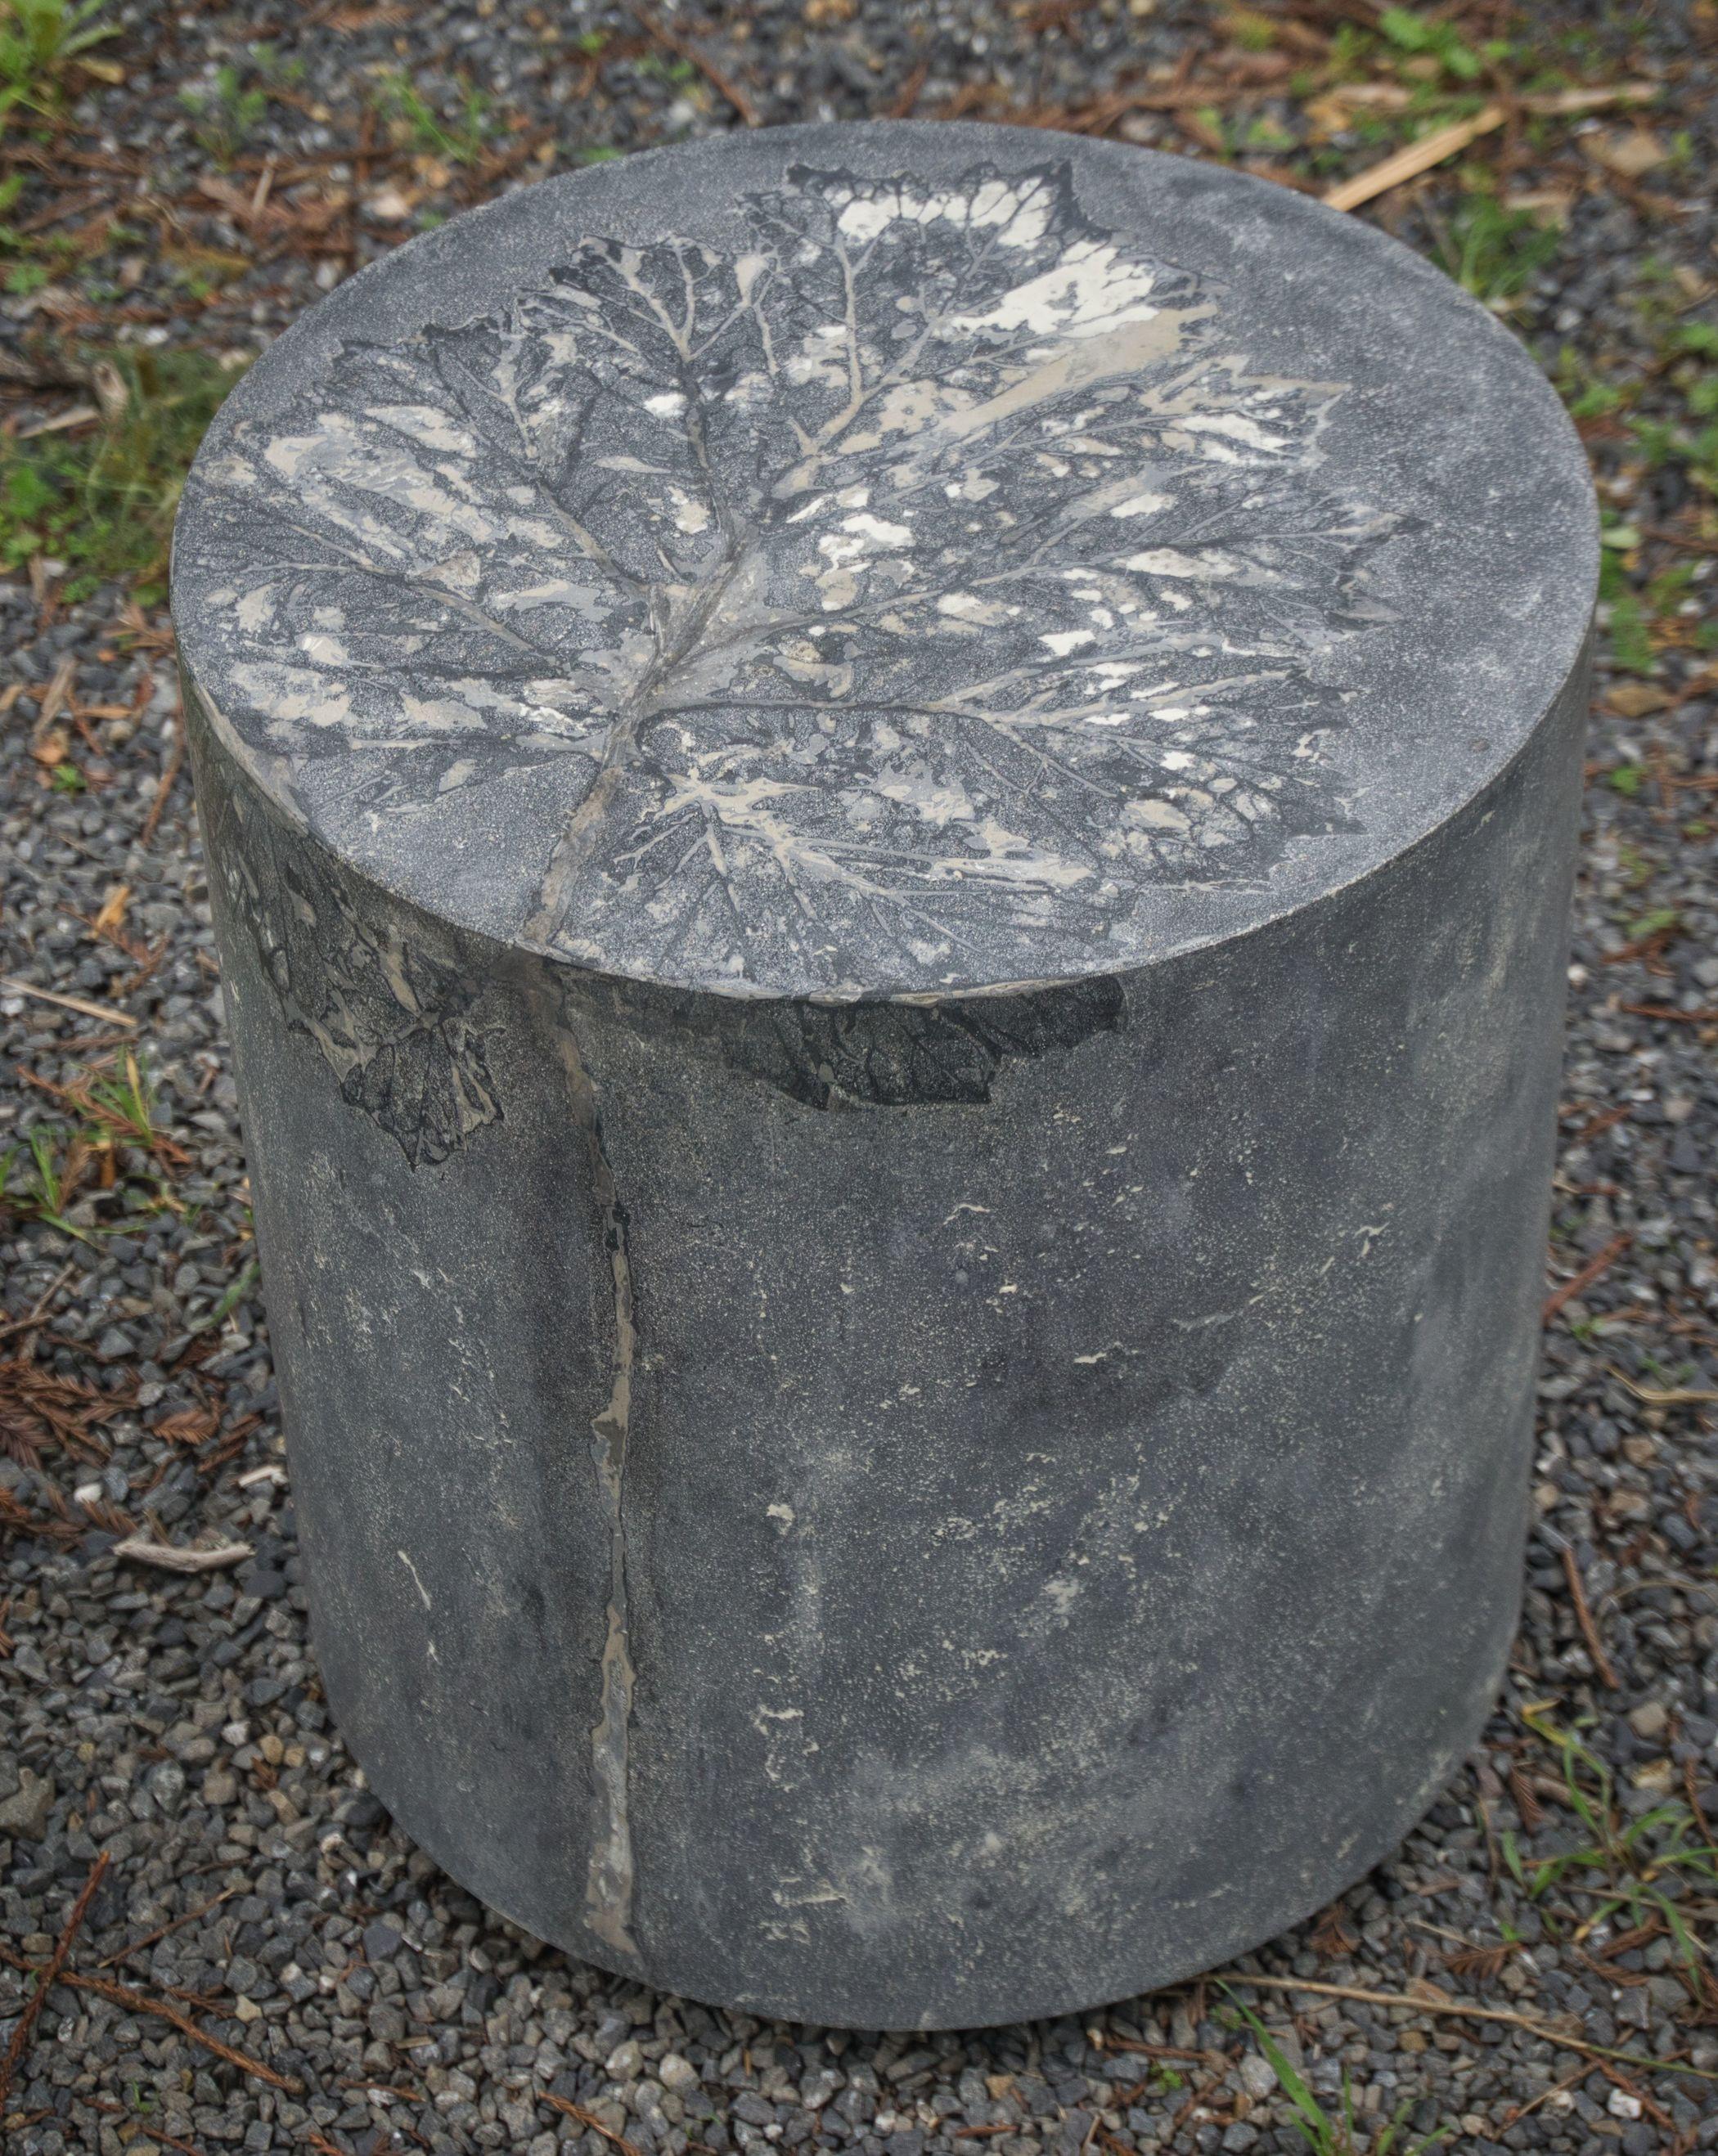 Customizable Round Concrete Stools & Side Tables with Leaf Impressions, 'Pliny' For Sale 10